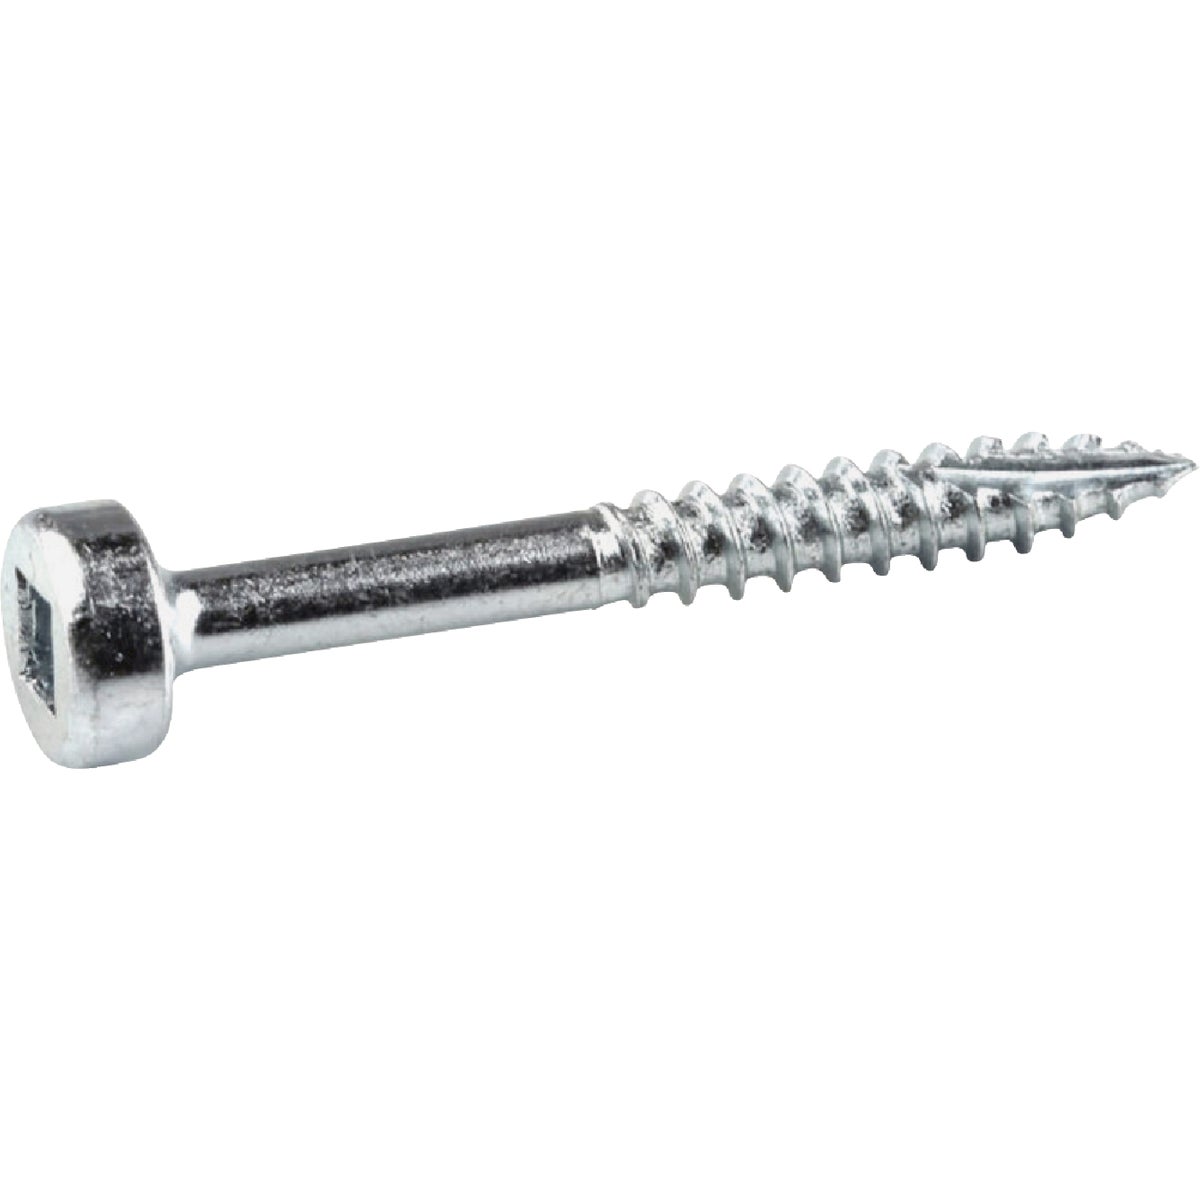 Item 320978, Kreg Zinc Screws are a good choice for a wide variety of indoor projects 